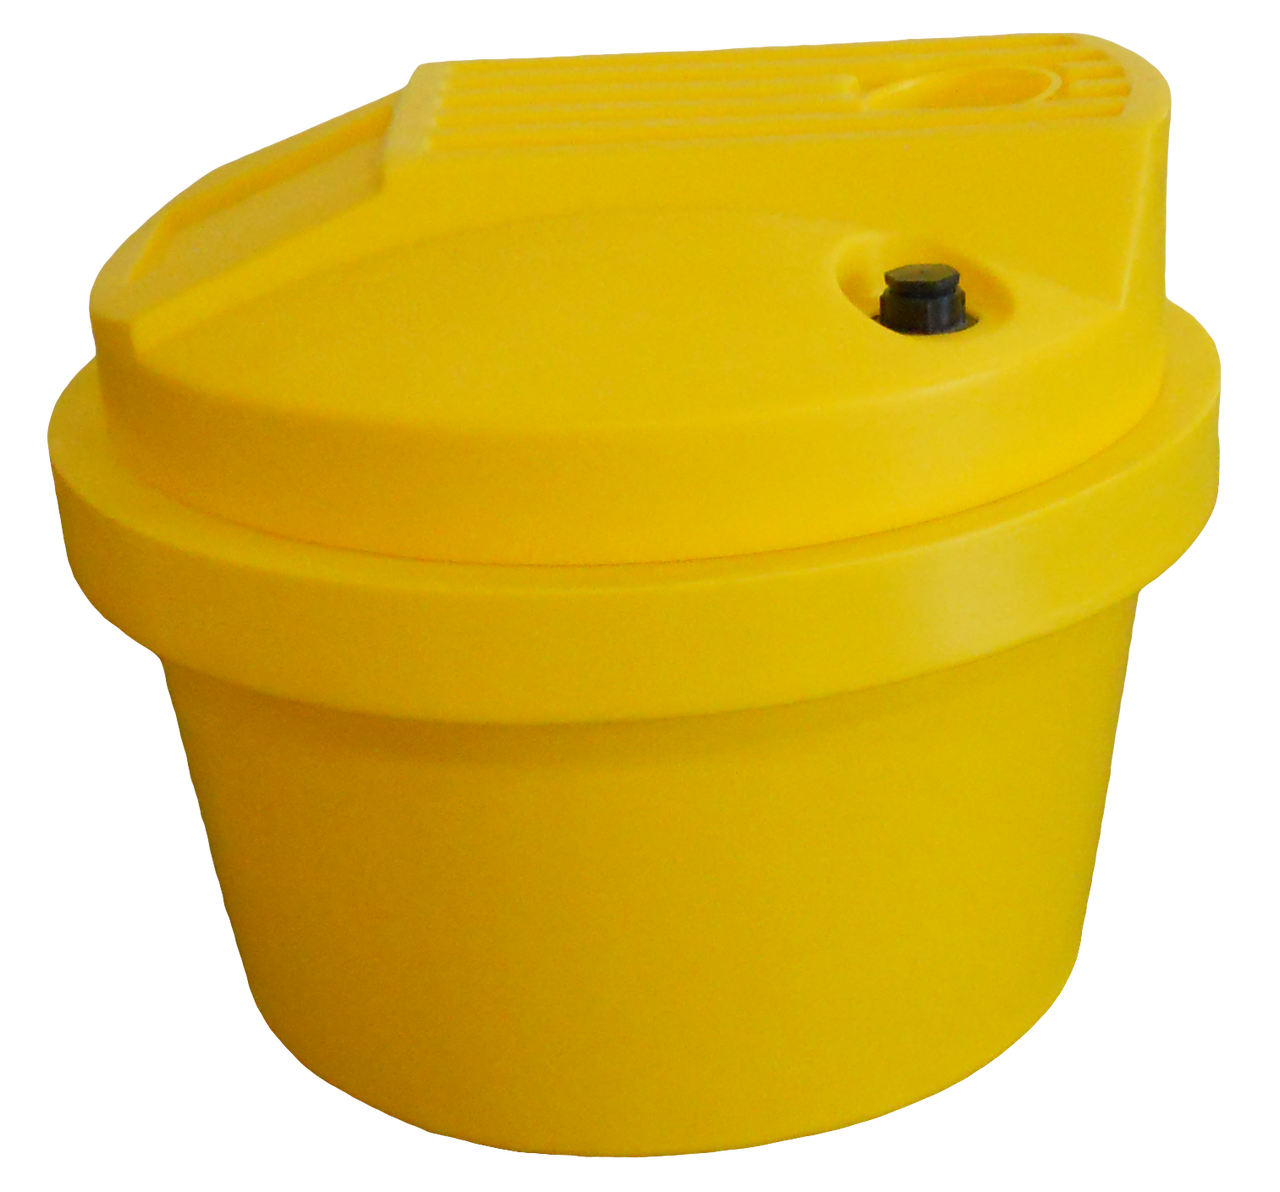 30 Gal Aquarius Tapered Chemical Feed Tank - LPE 1.5 - 3/16" Wall - Yellow